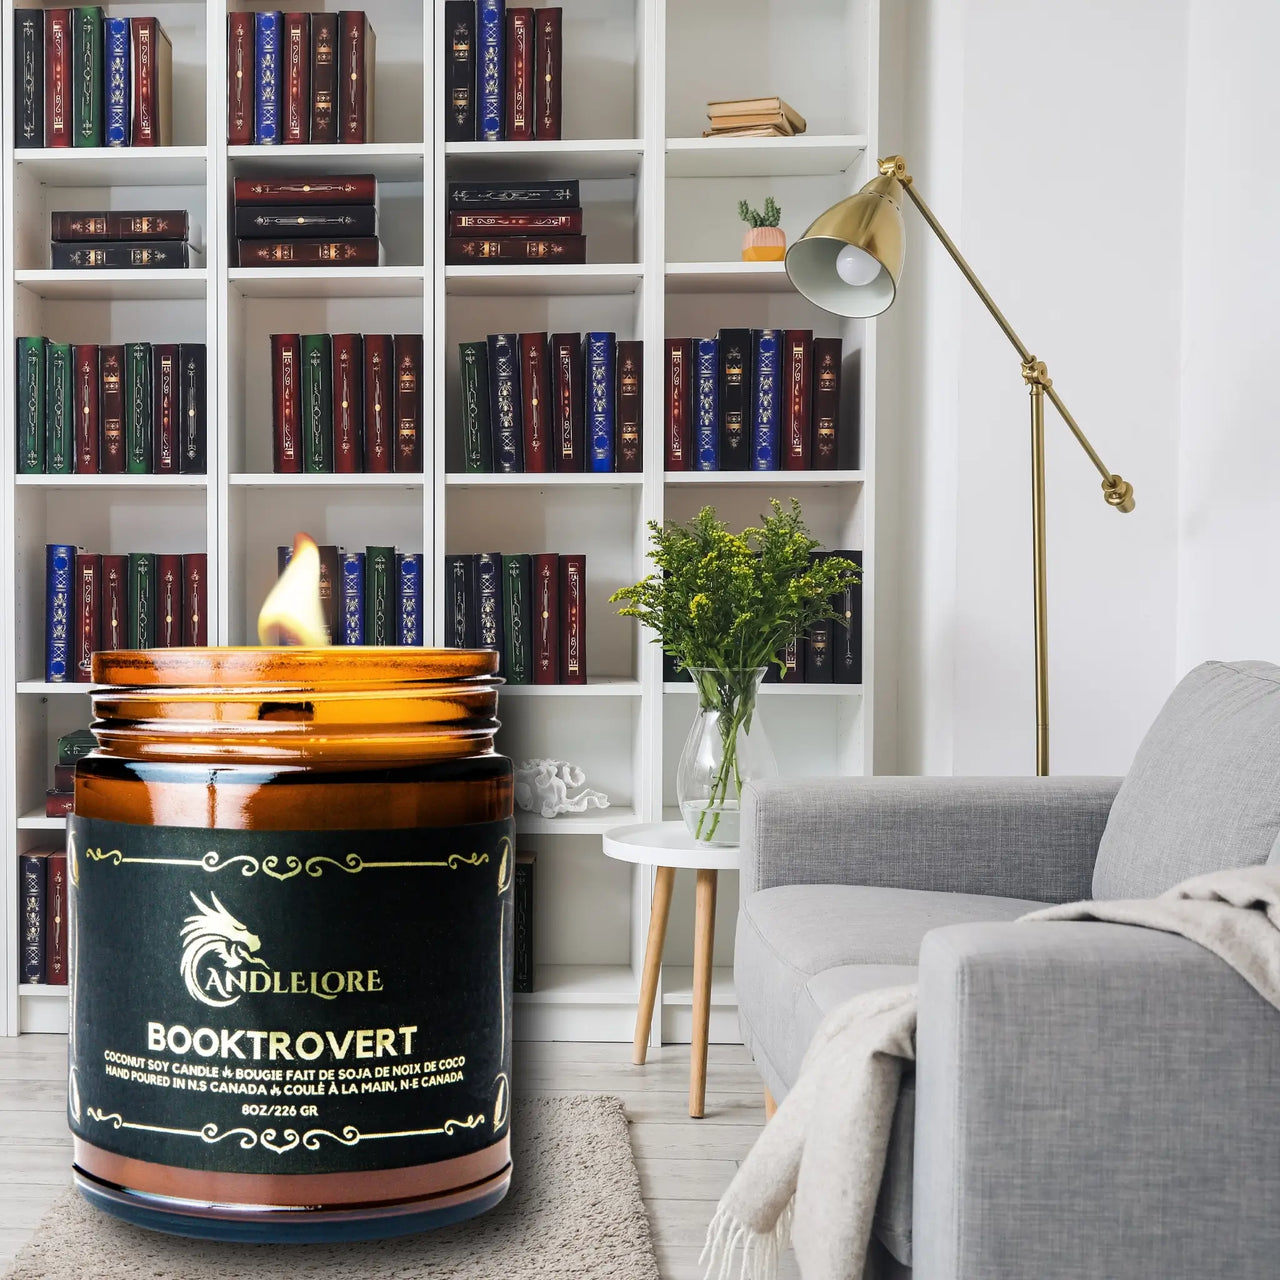 Booktrovert Candle in a personal library